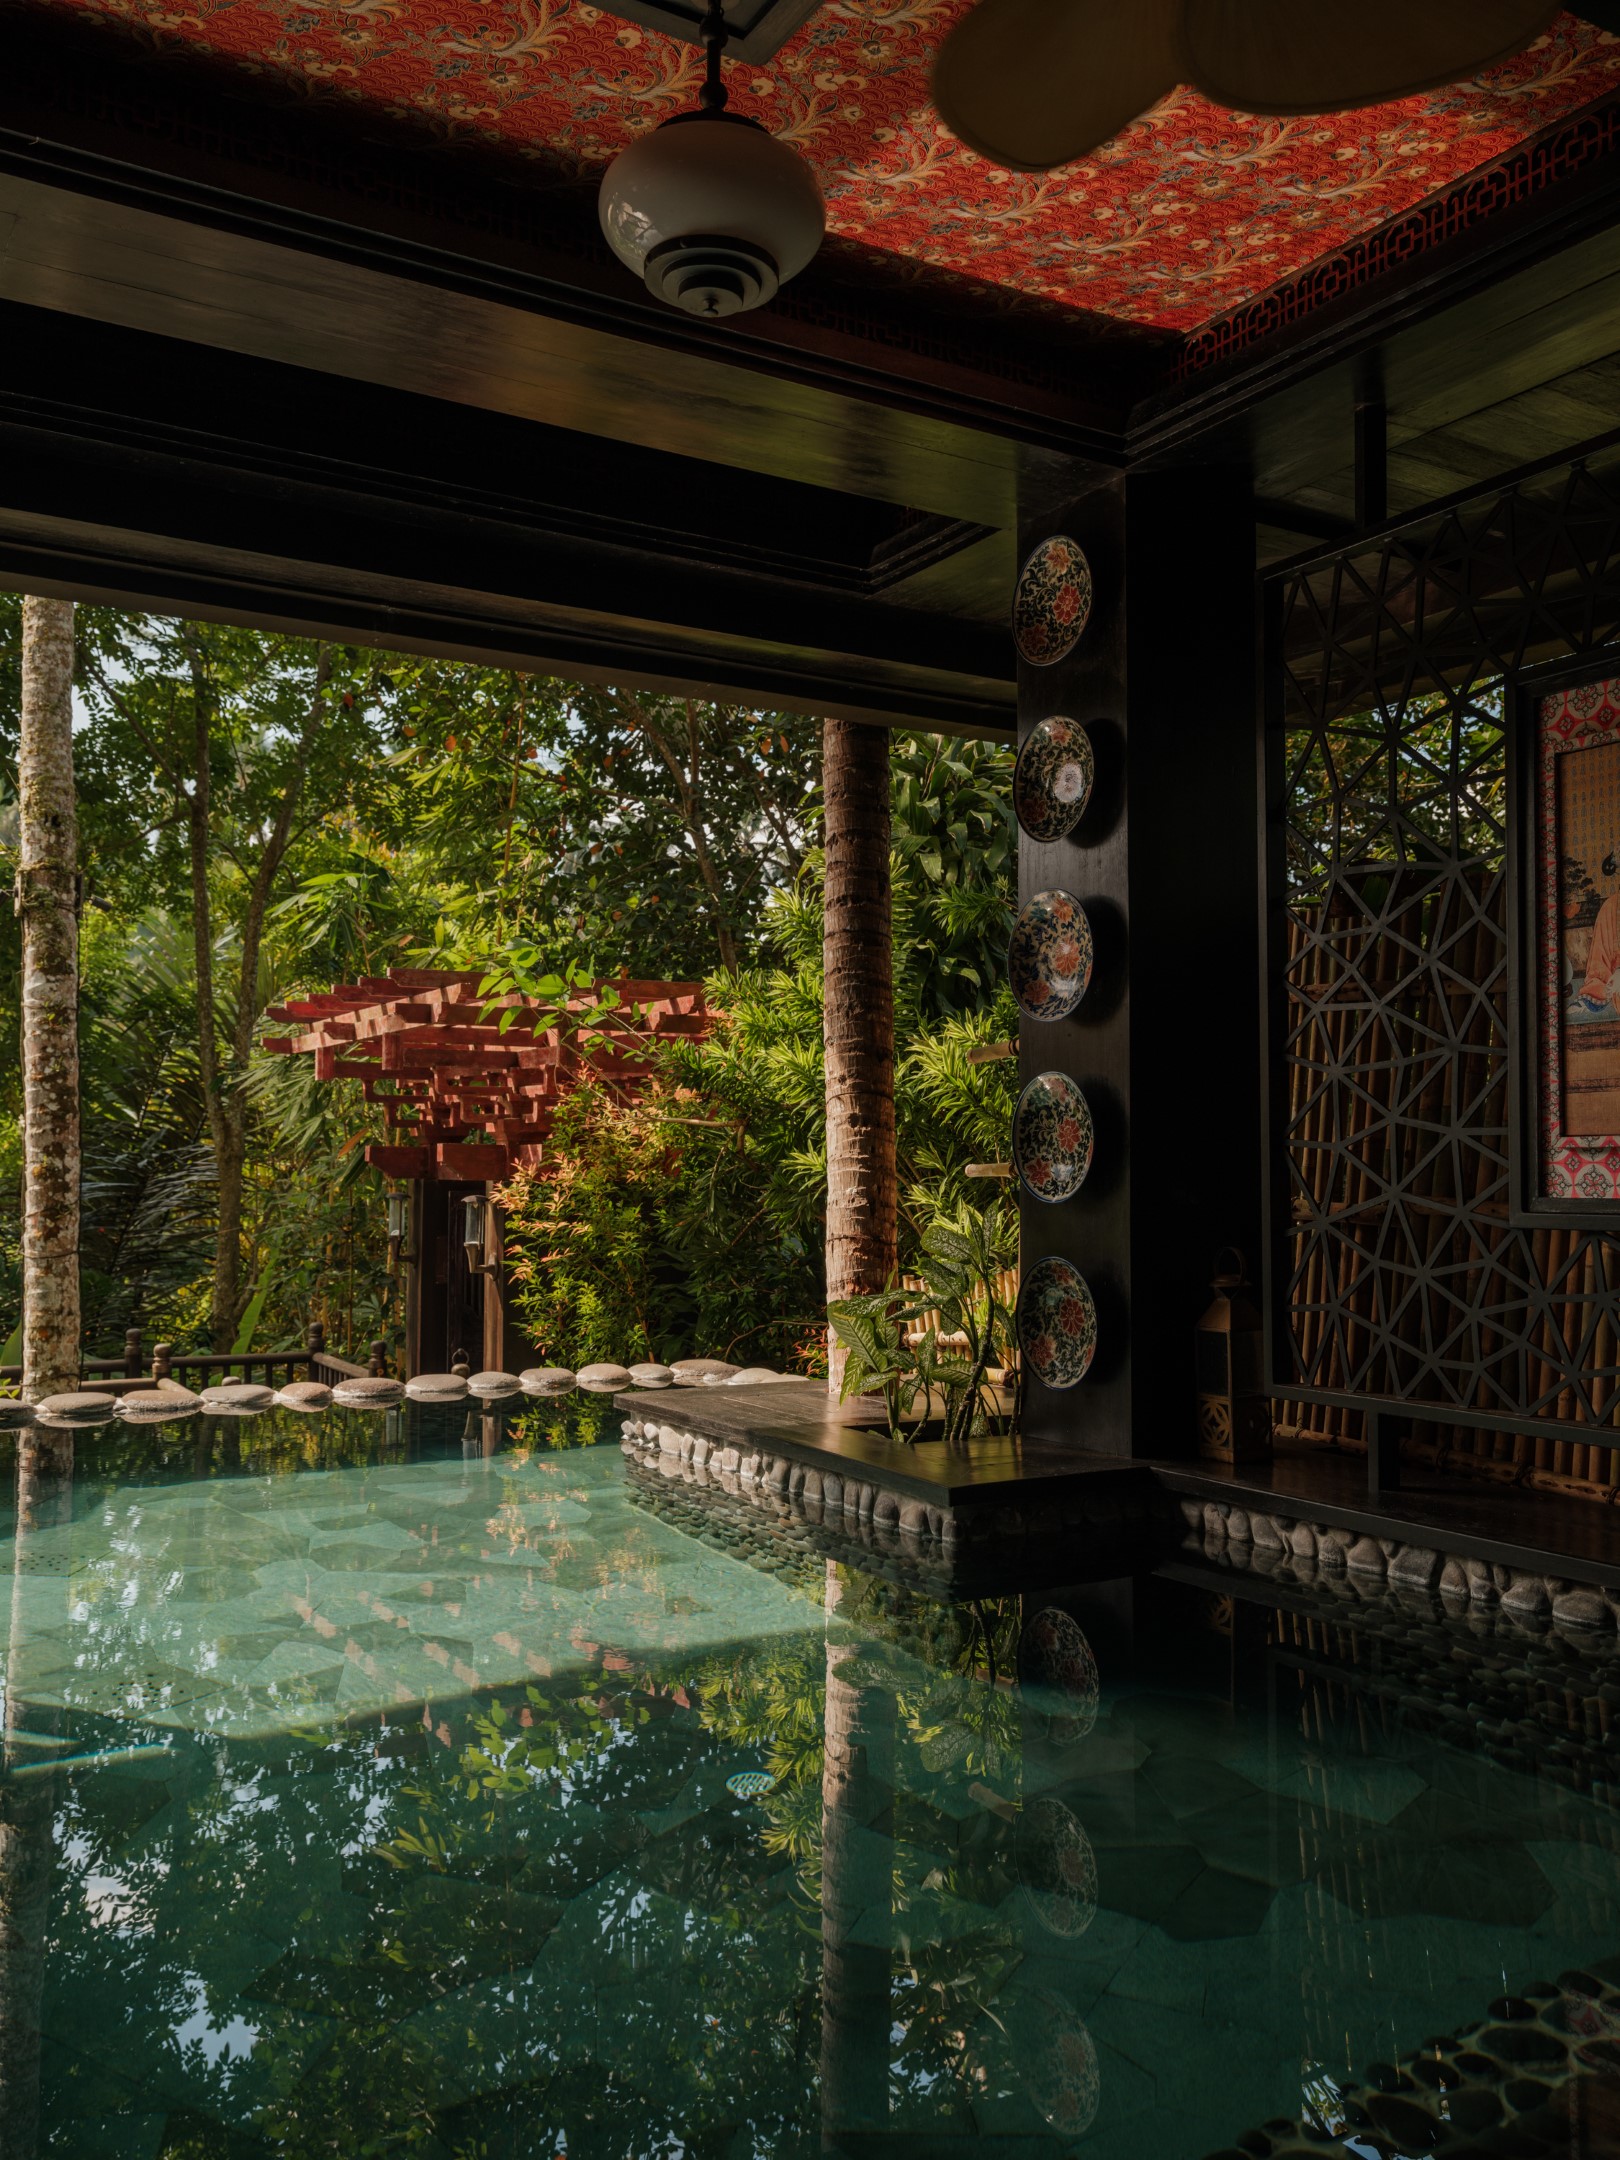 capella ubud bali the lodge, The Lodge at Capella Ubud, Bali enchants travellers with its tented luxury